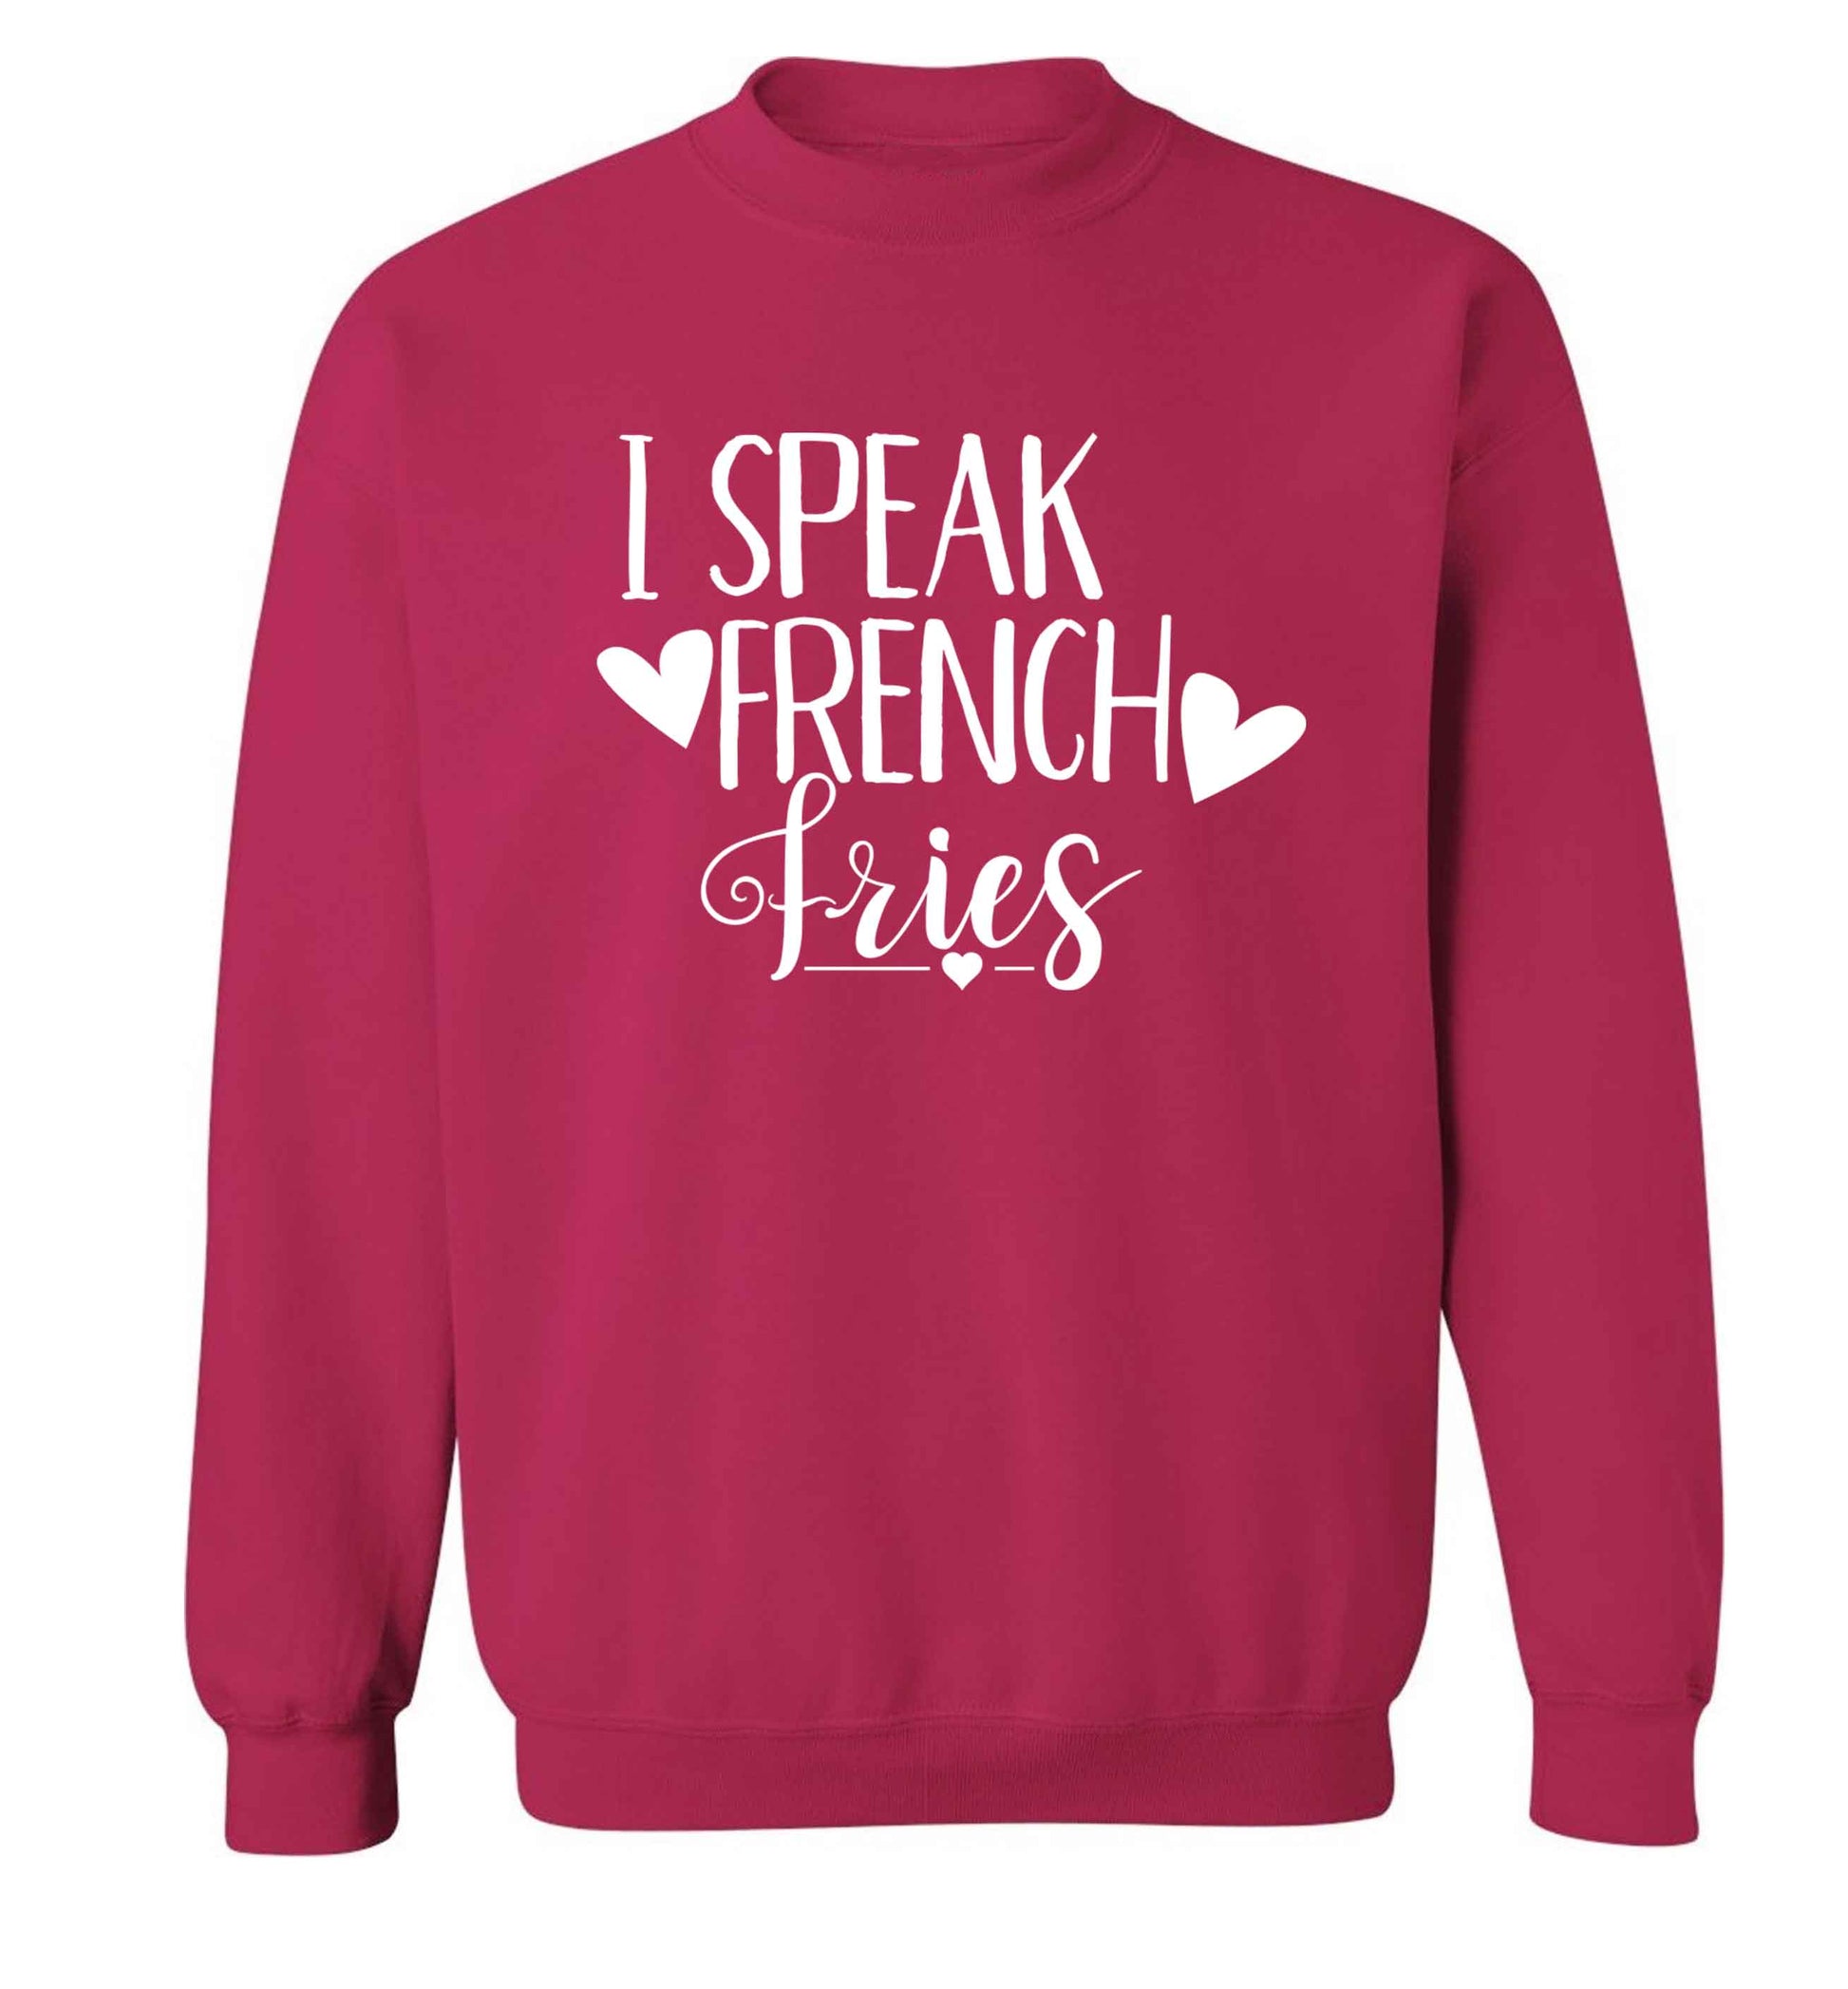 I speak French fries Adult's unisex pink Sweater 2XL